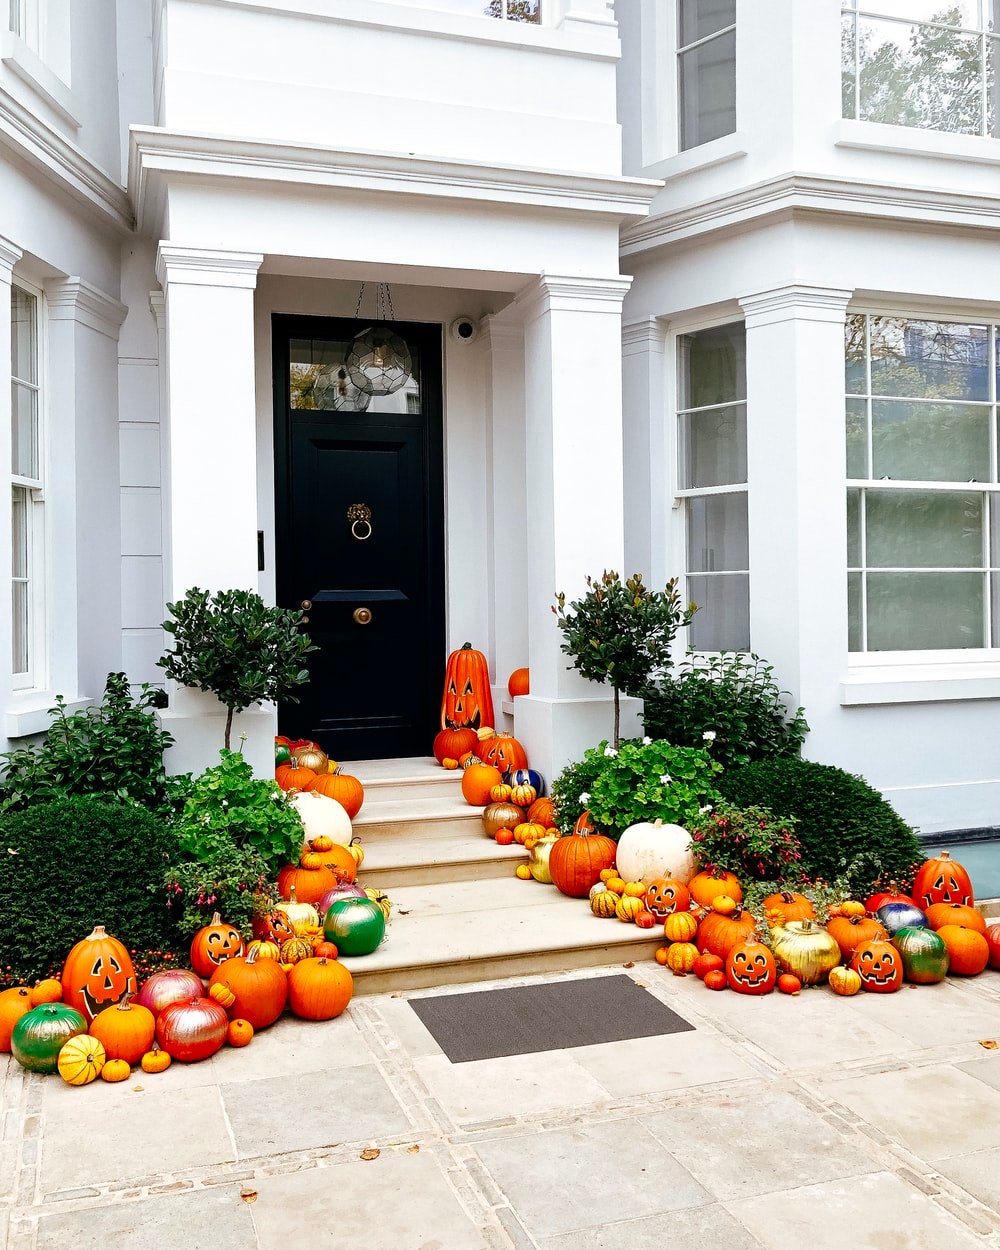 Halloween House Picture. Download Free Image